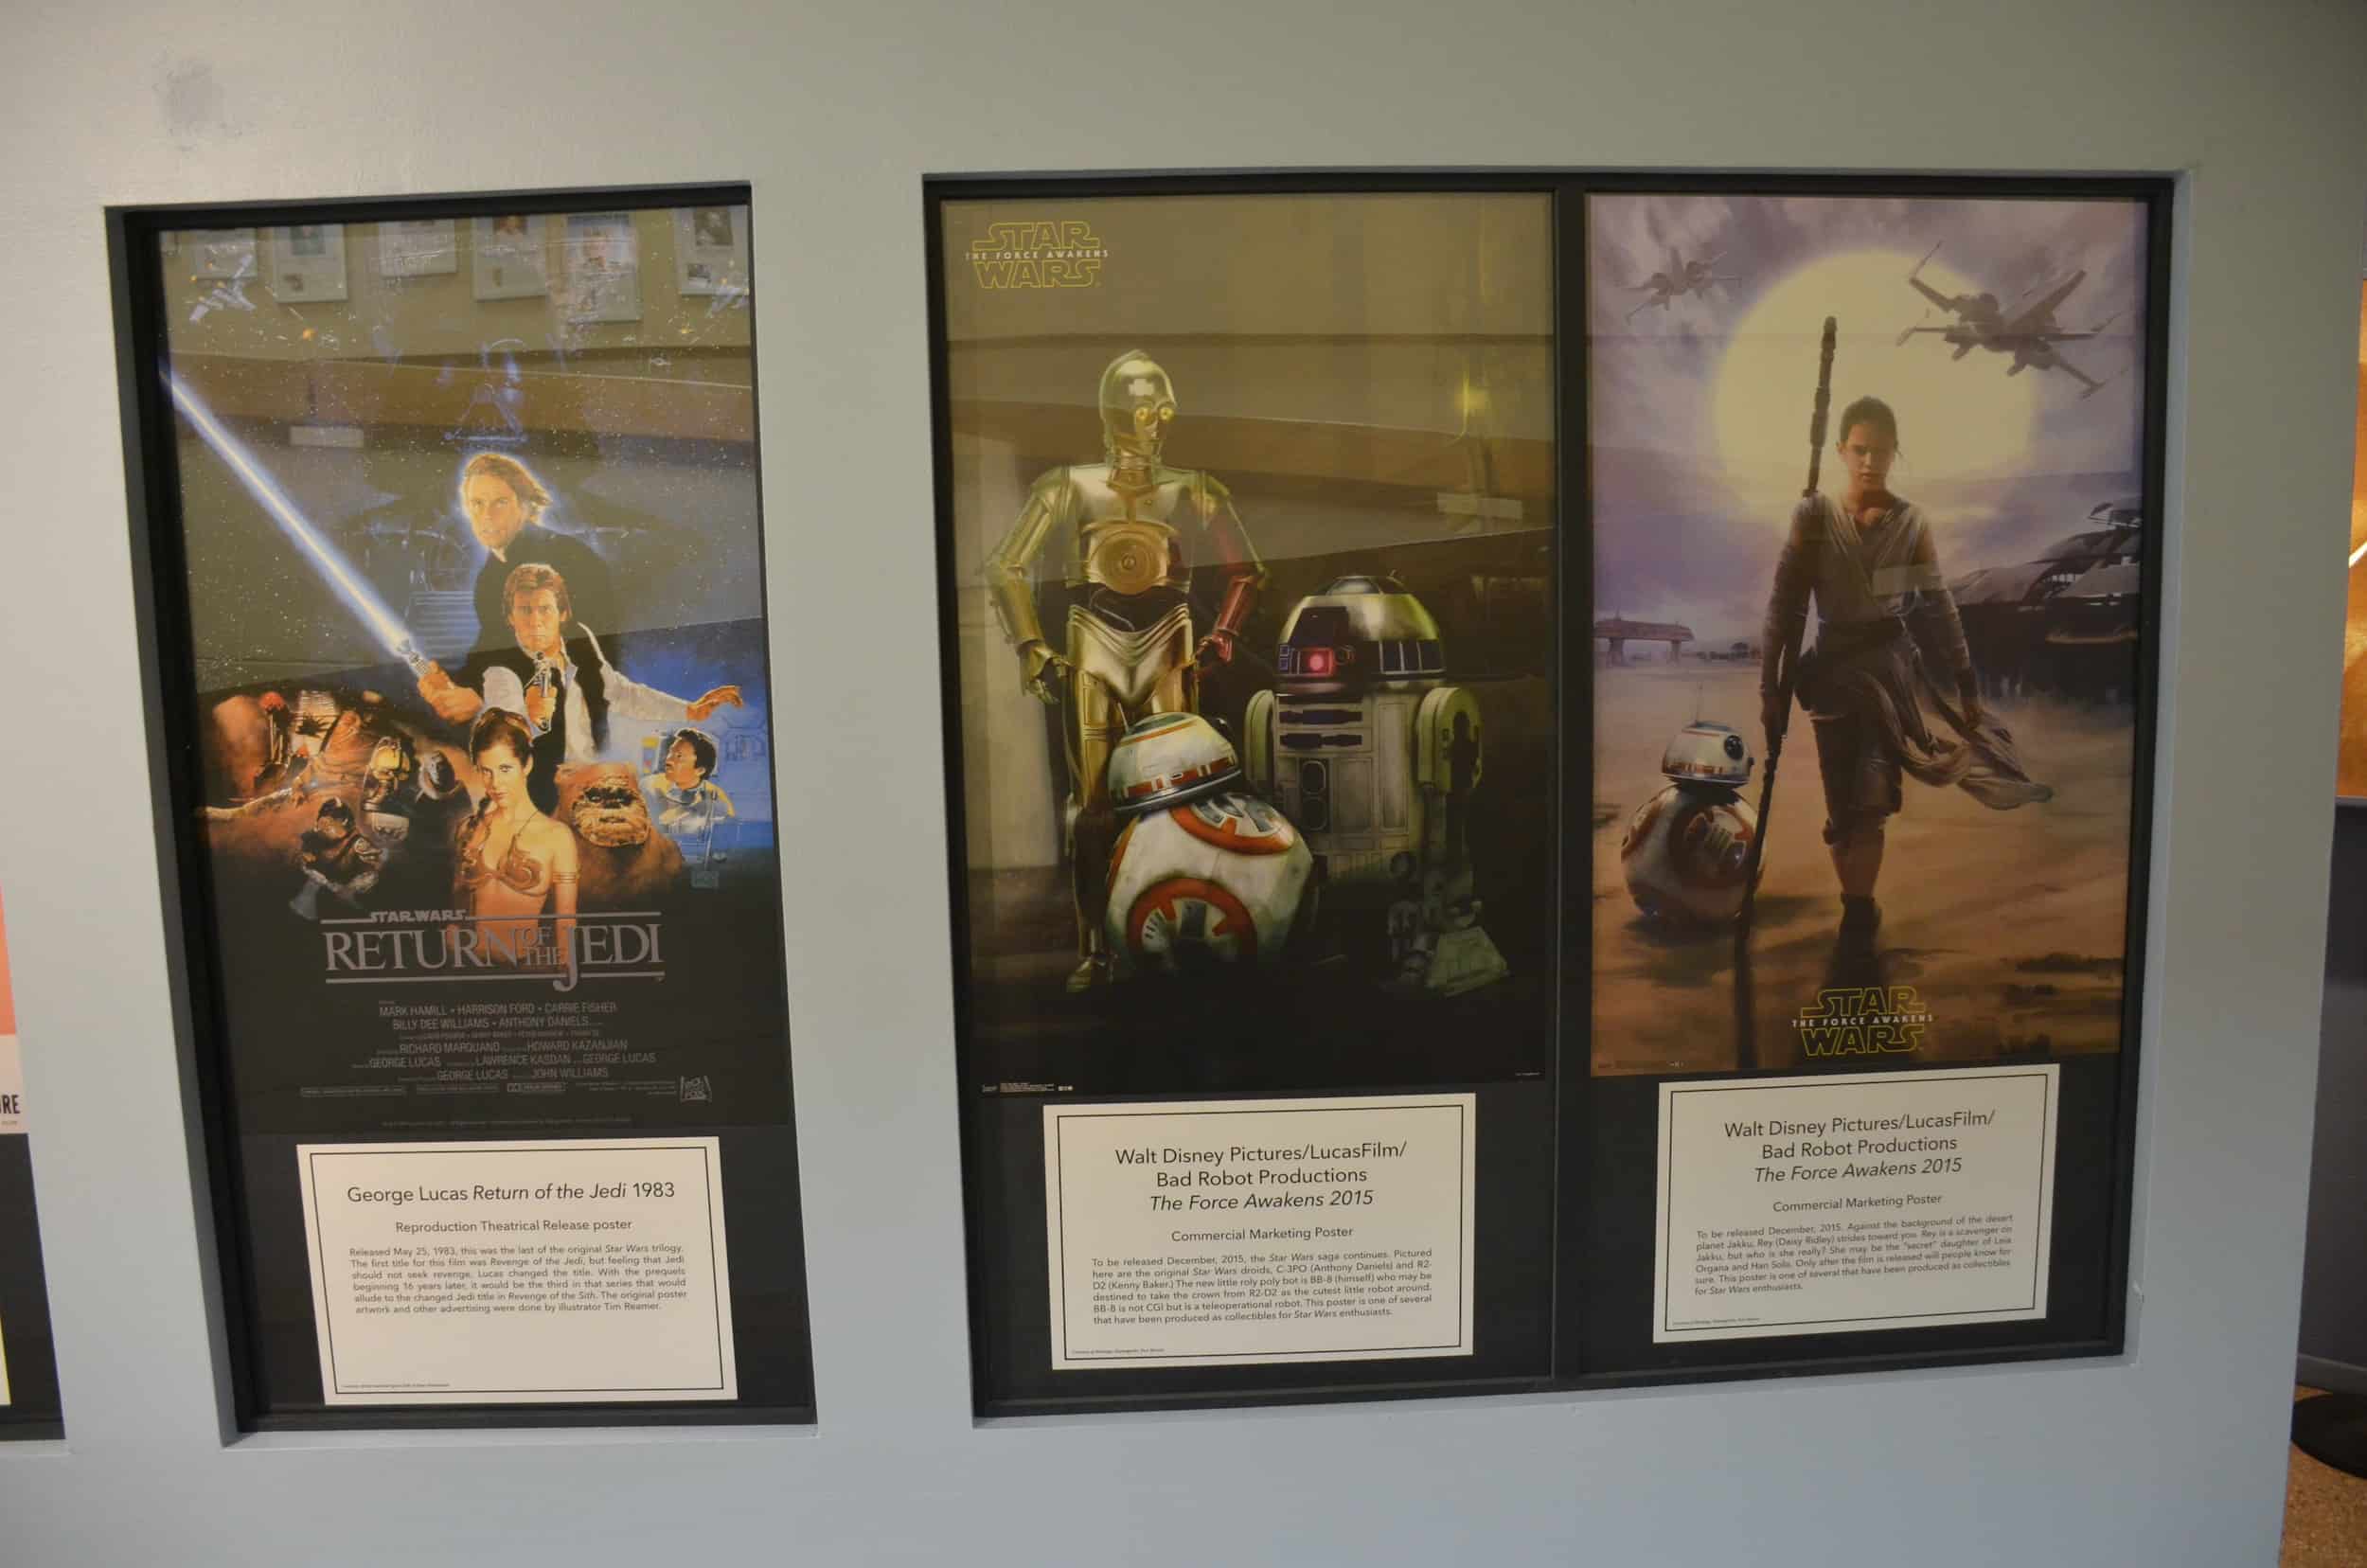 Star Wars posters at the New Mexico Museum of Space History in Alamogordo, New Mexico